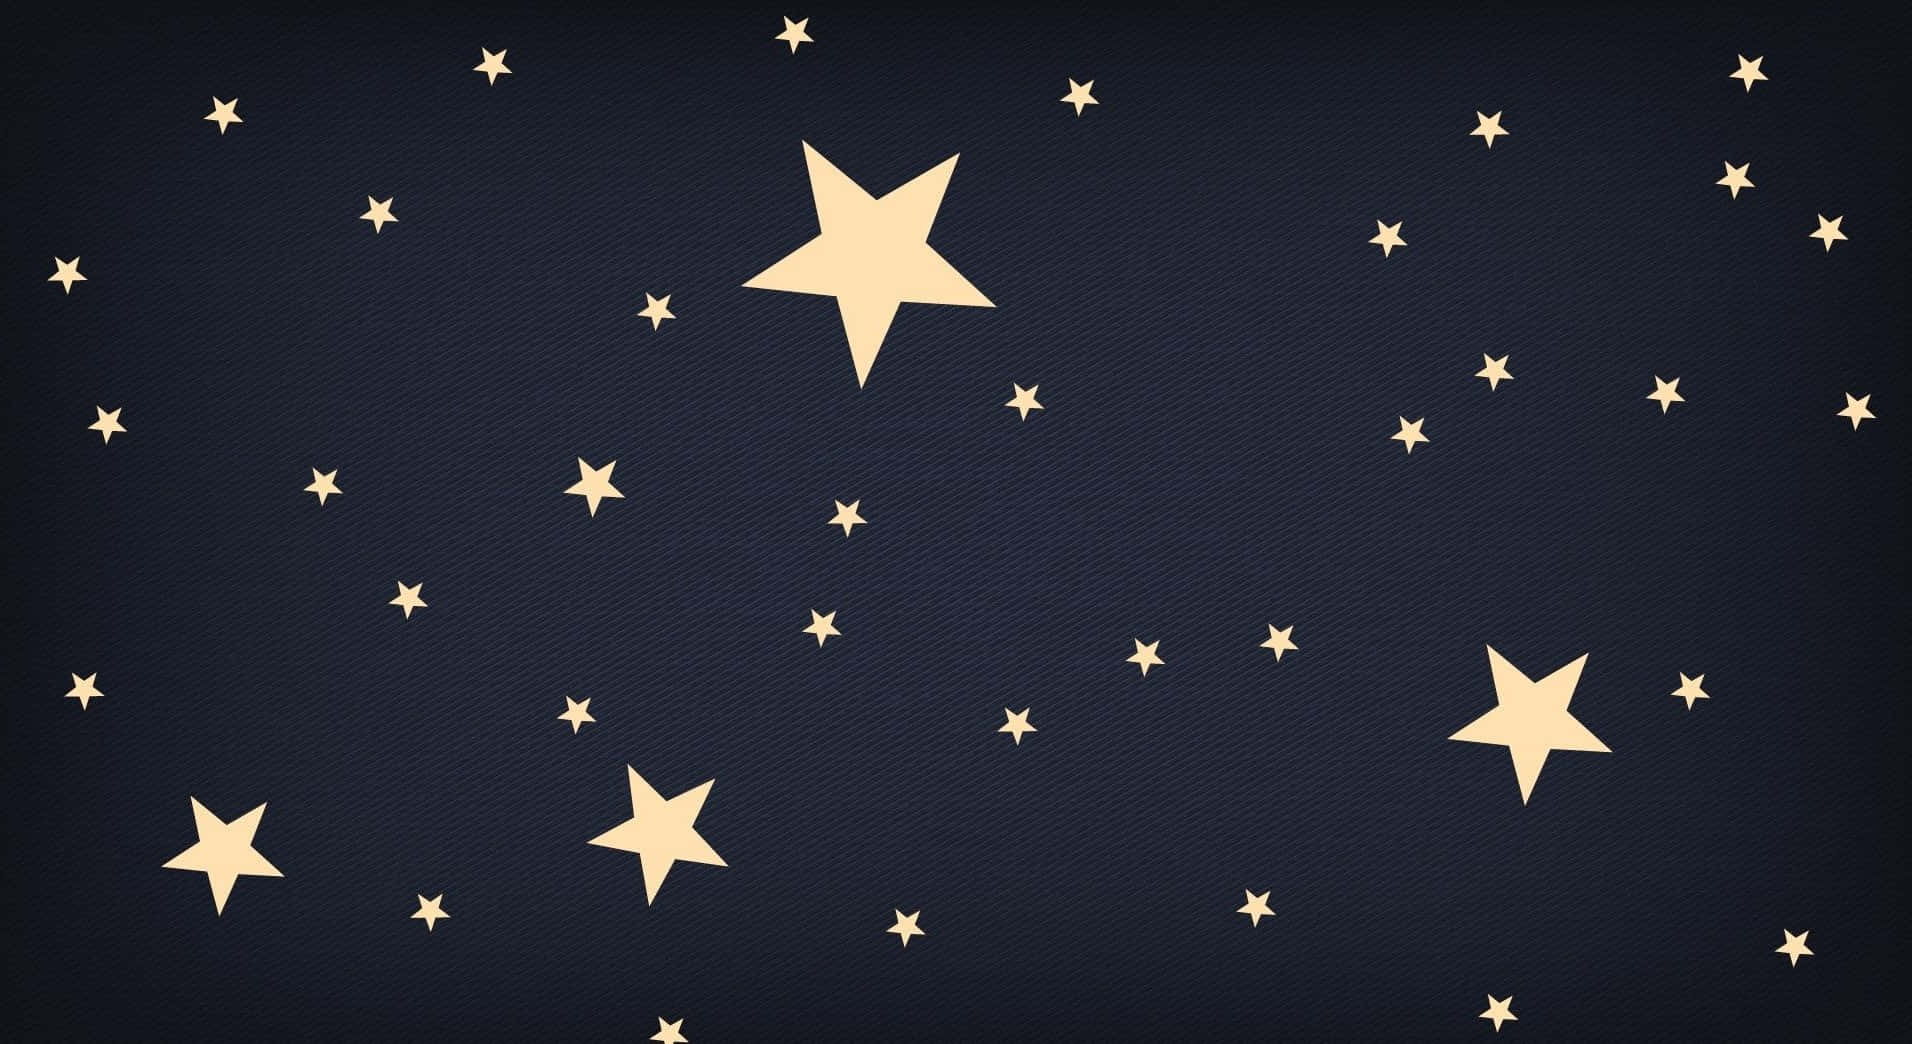 Illuminate Your Dreams with Aesthetic Star Wallpaper